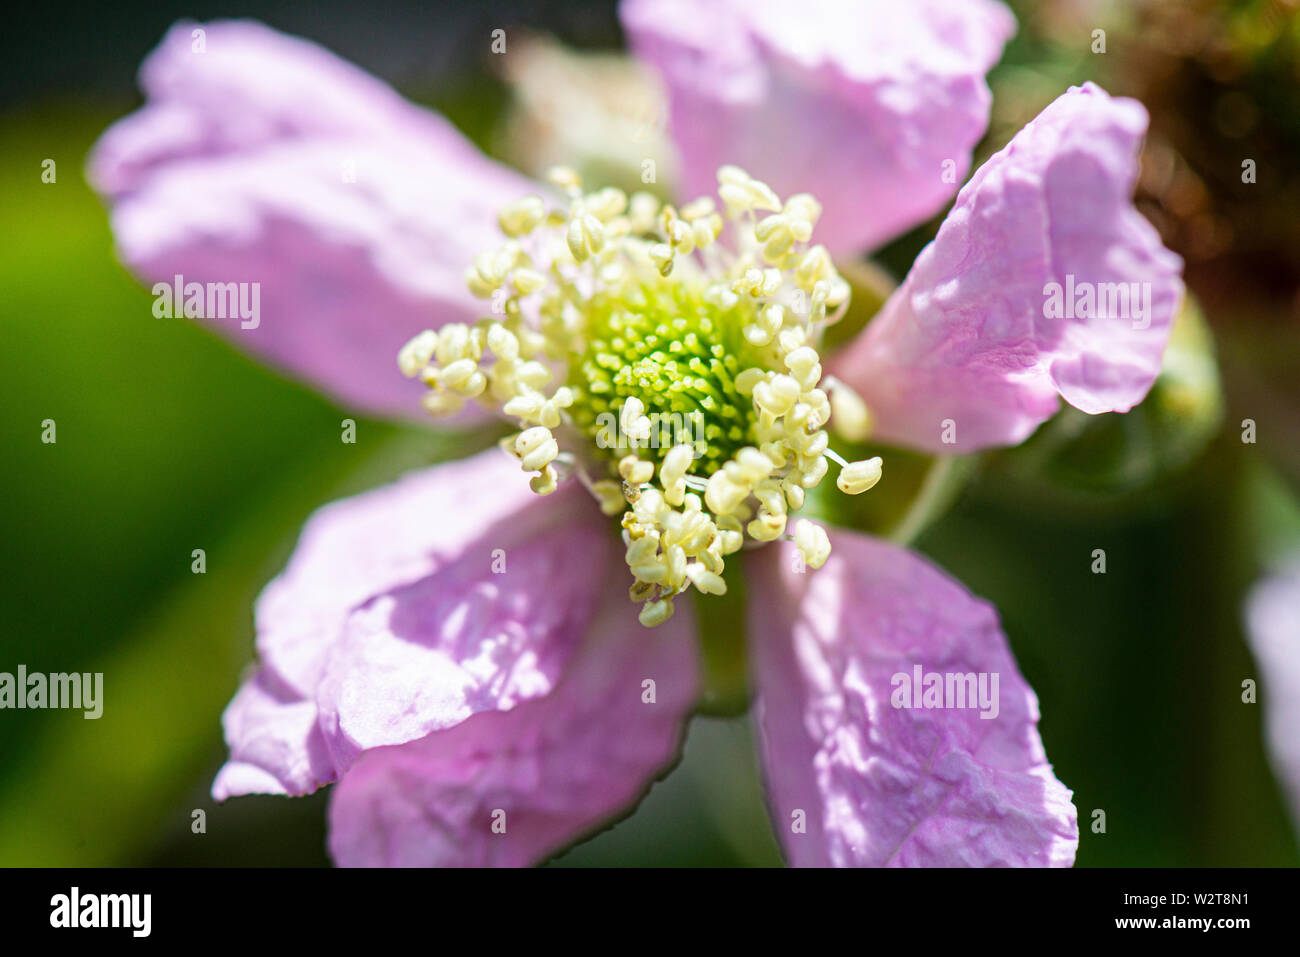 A close up of the flower of a thornless blackberry Stock Photo